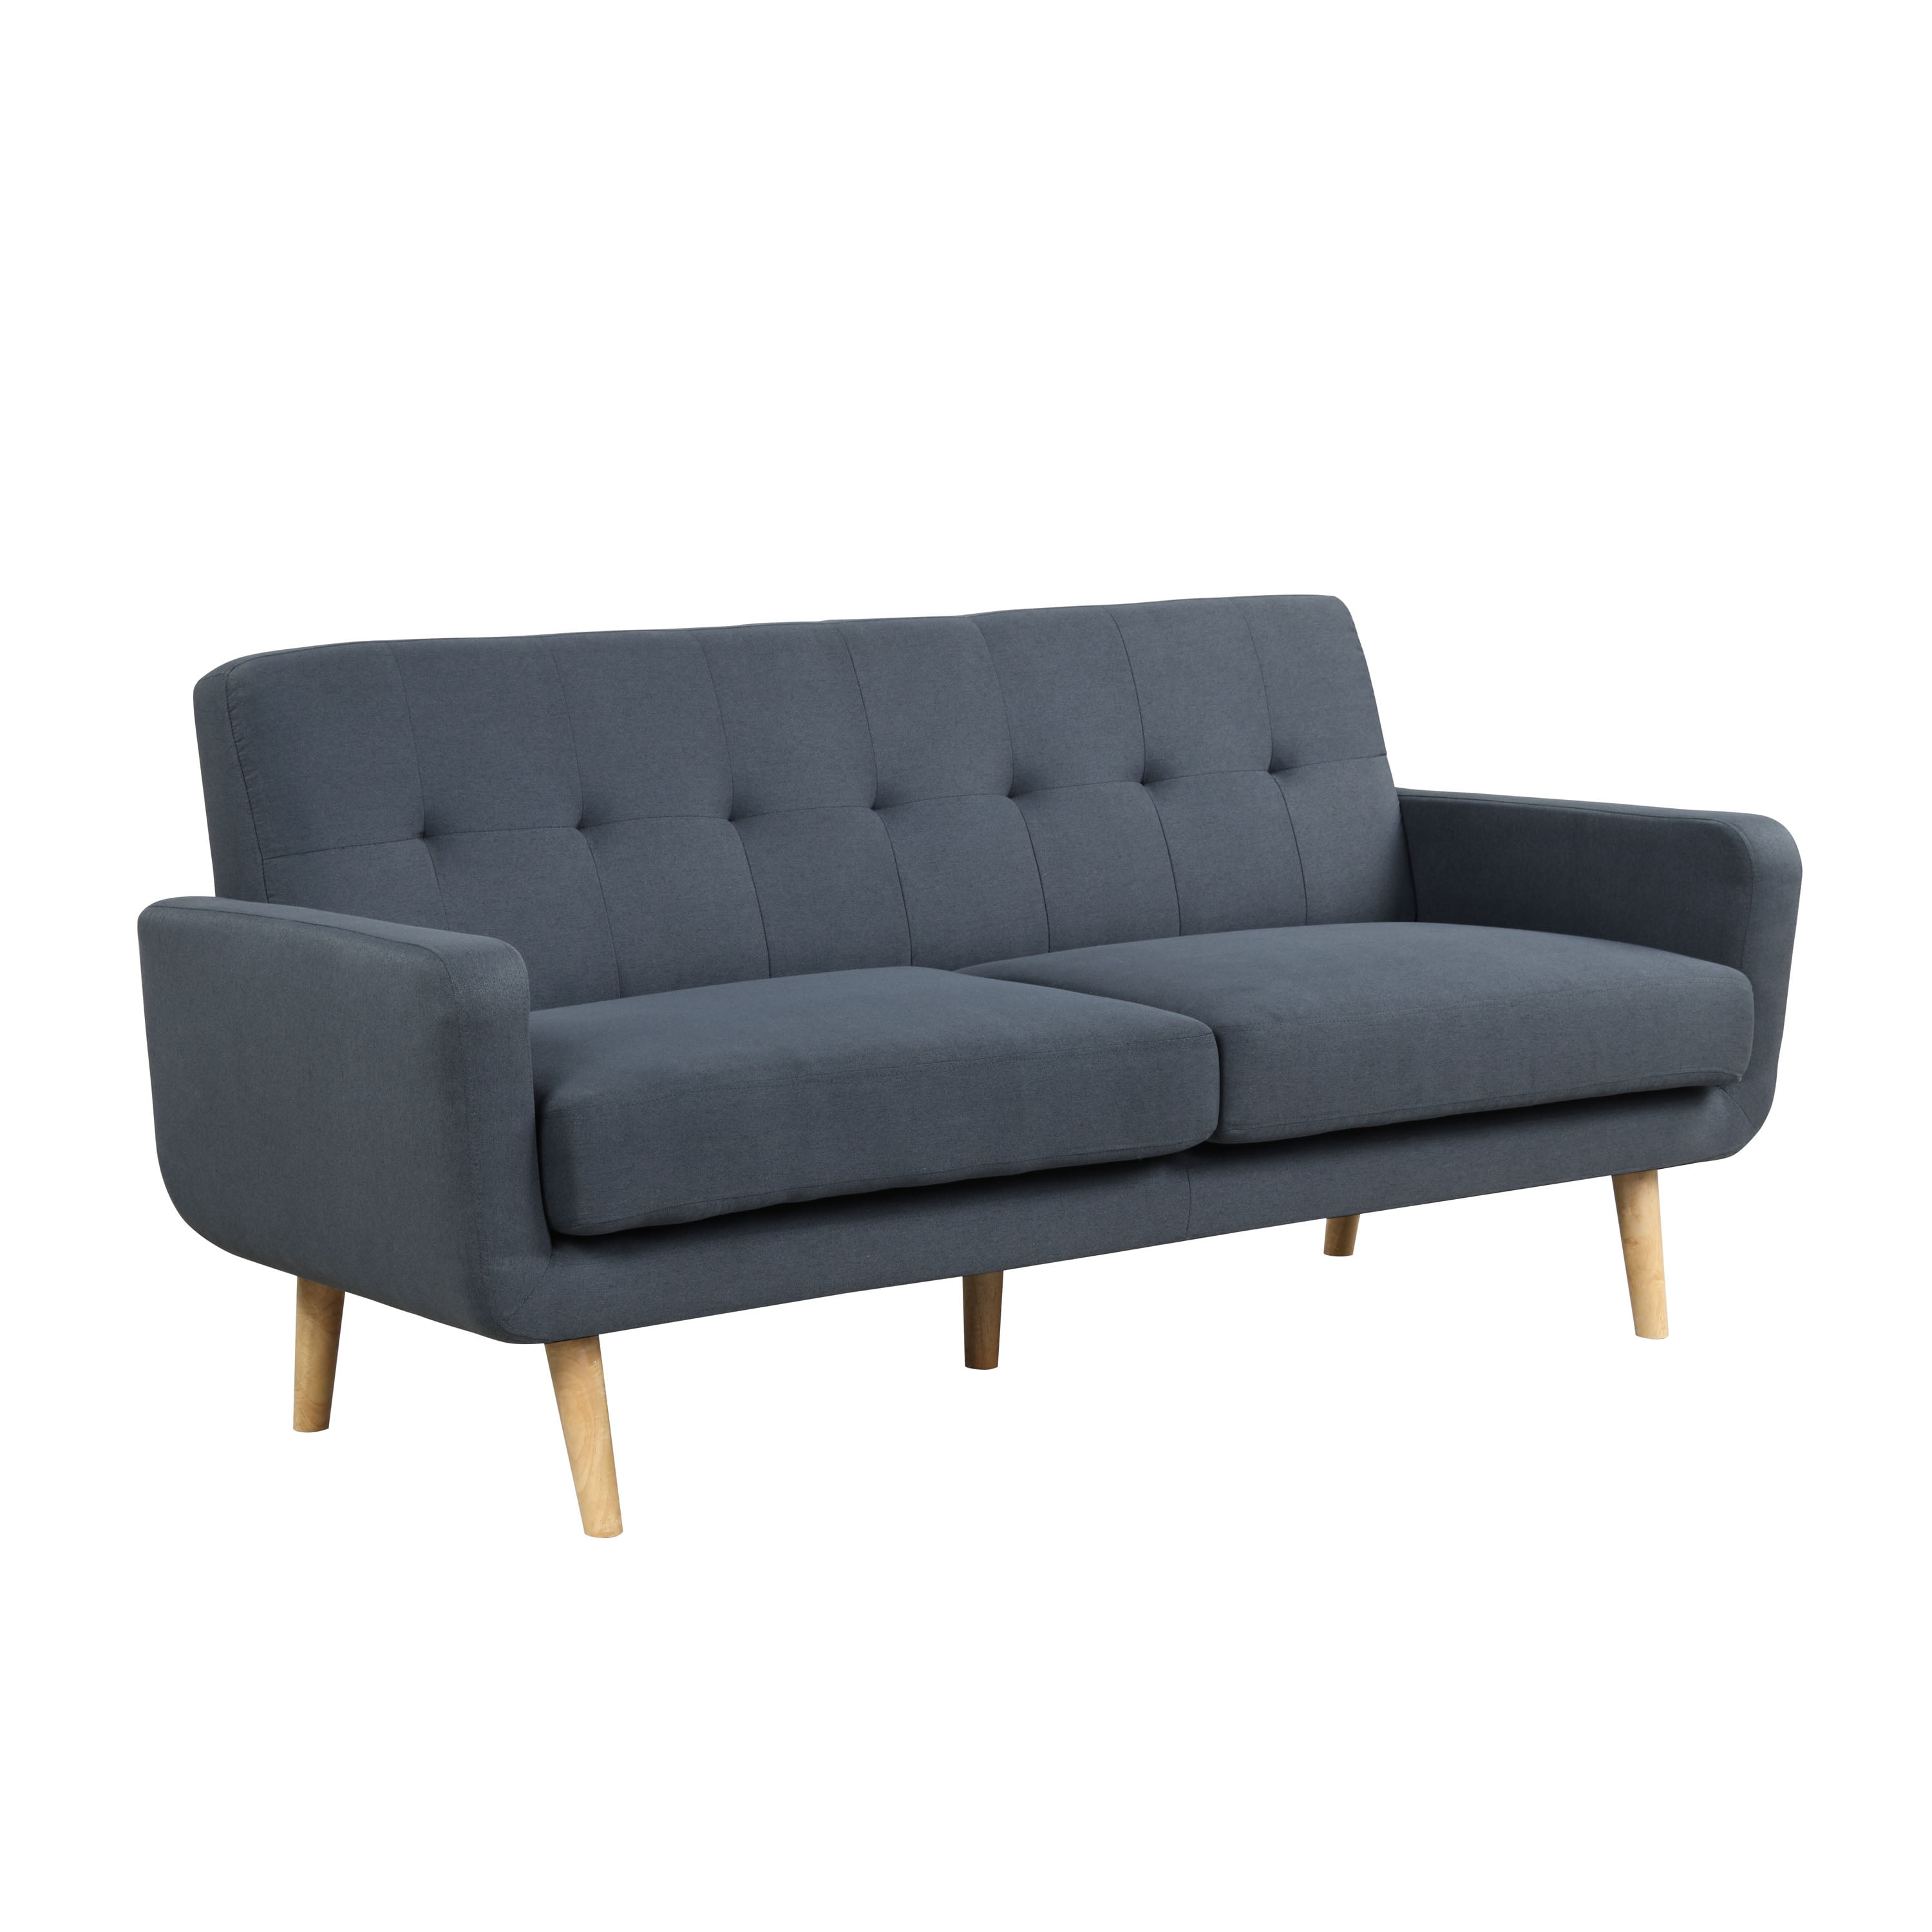 Lifestyle Solutions Taryn Curved Arm Fabric Sofa Black for sale online 